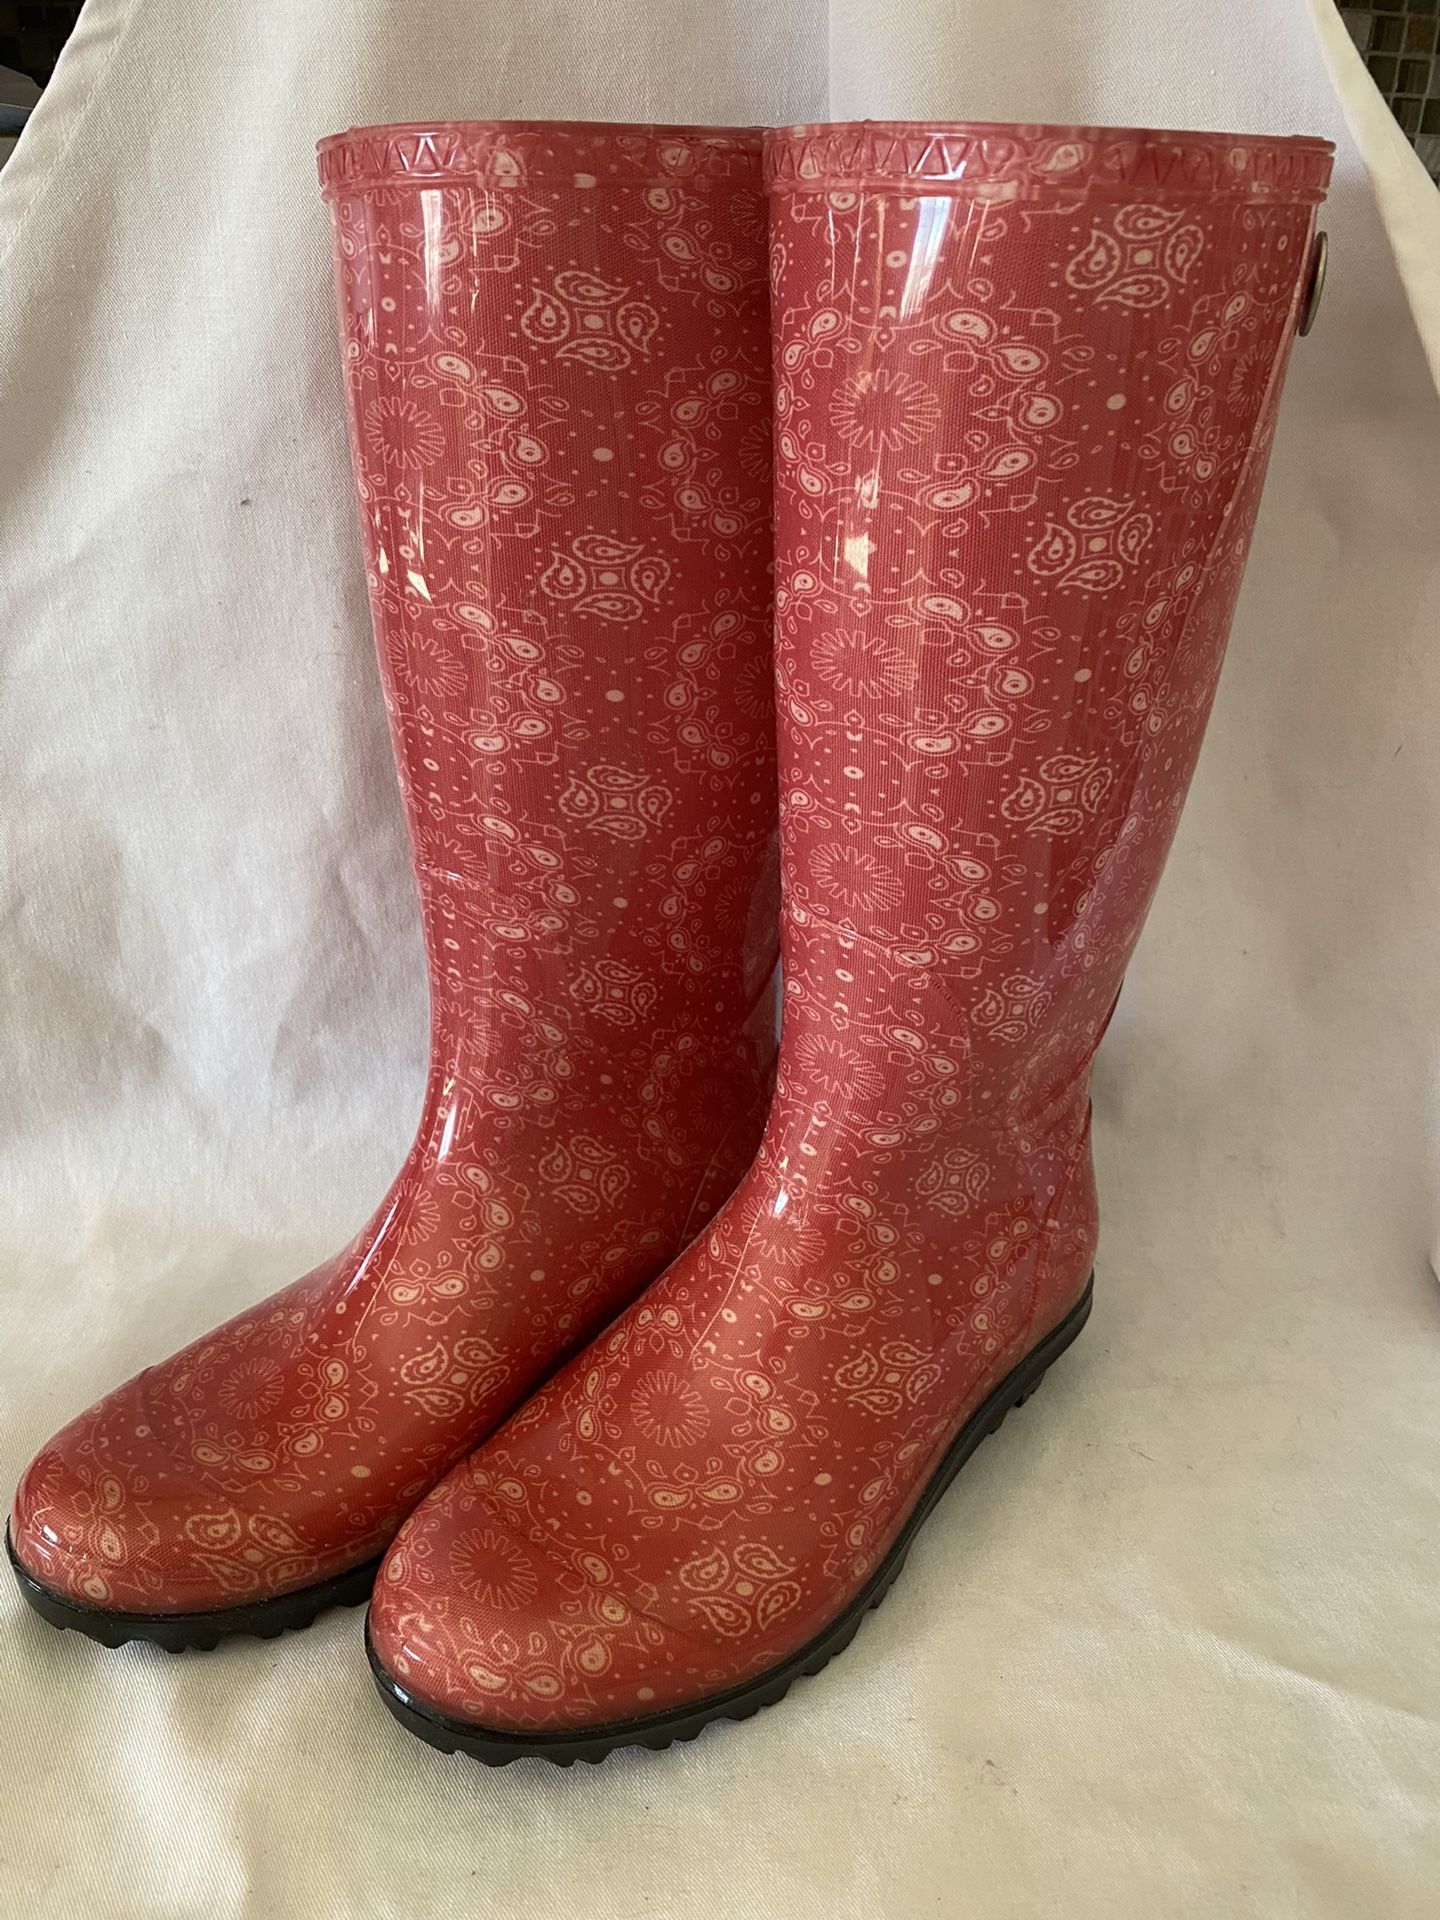 Woman’s UGG Rain boots Size 7 Excellent Condition 